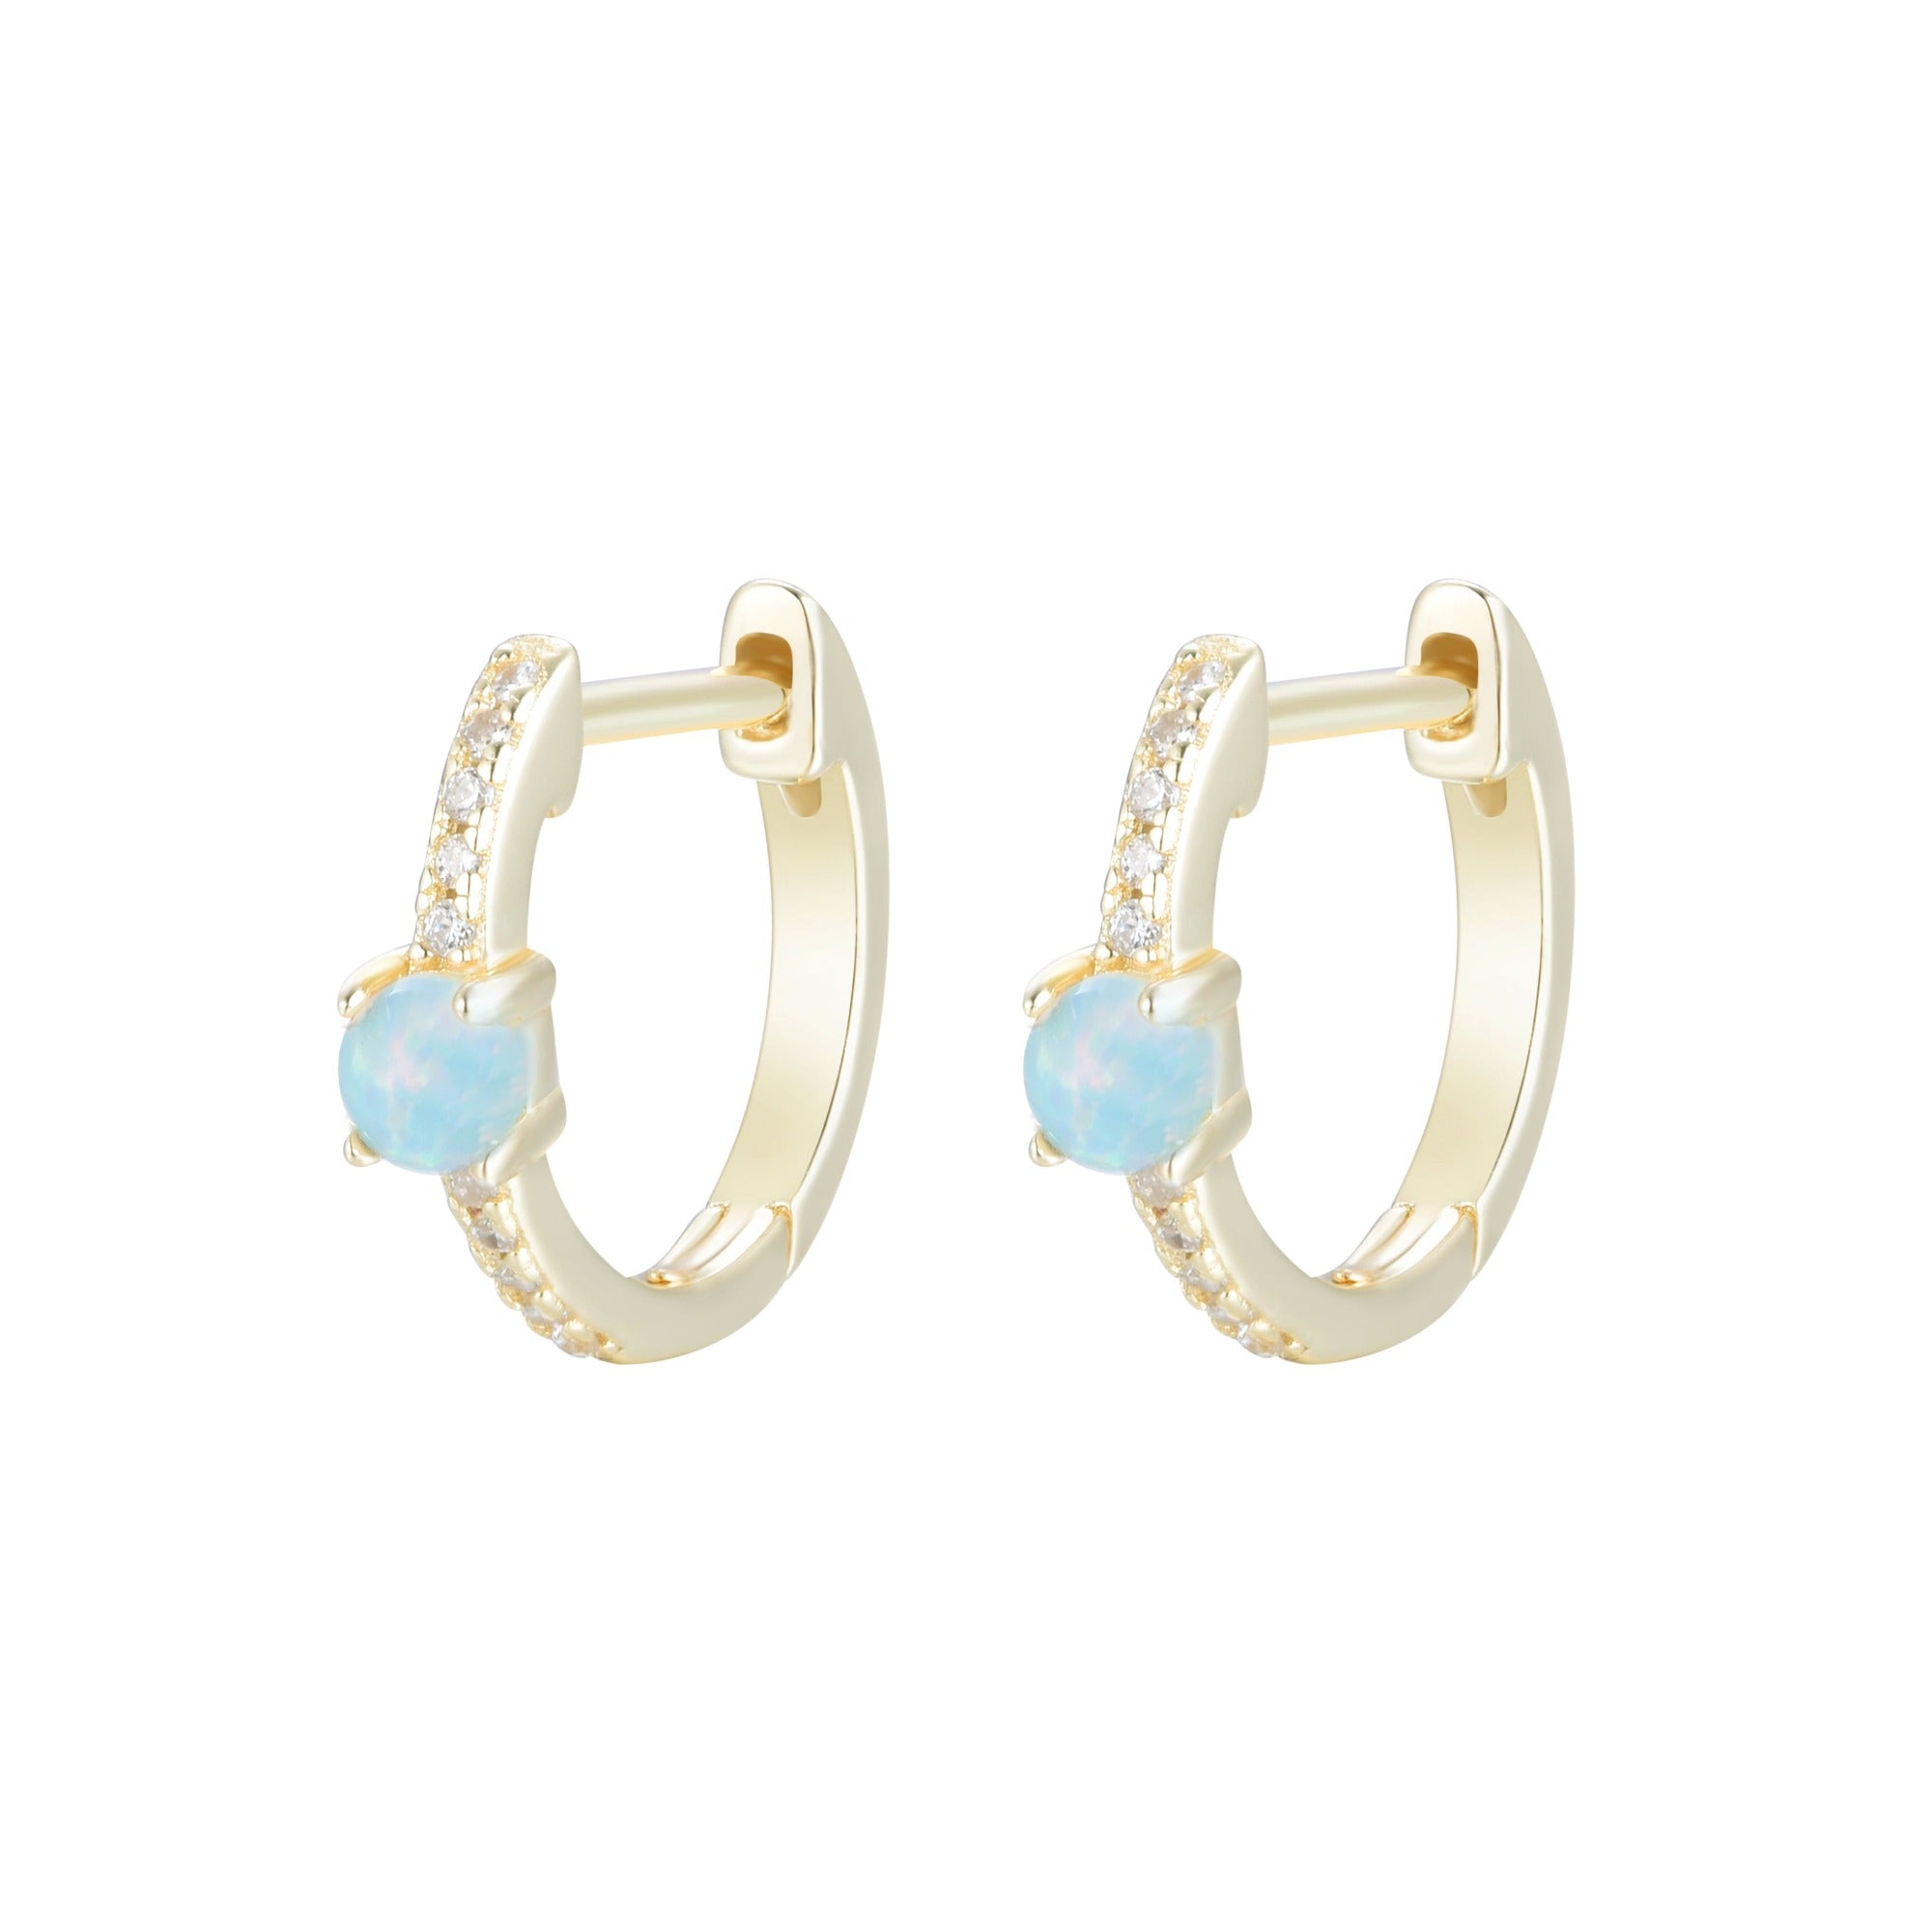 opal huggie earrings with crystals white opal